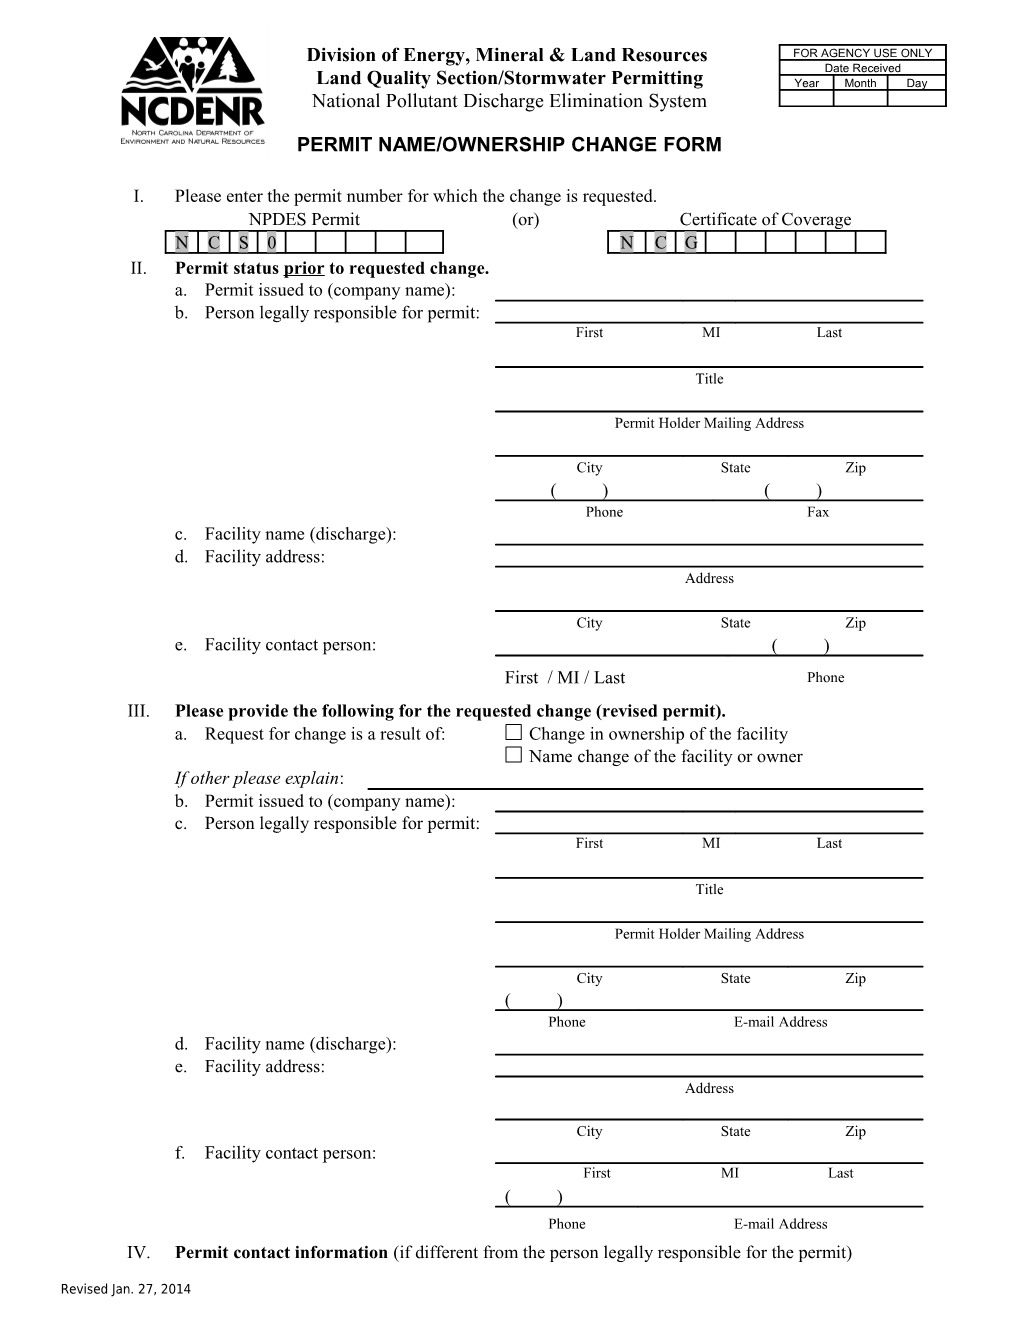 Npdes Permit Name/Ownership Change Form